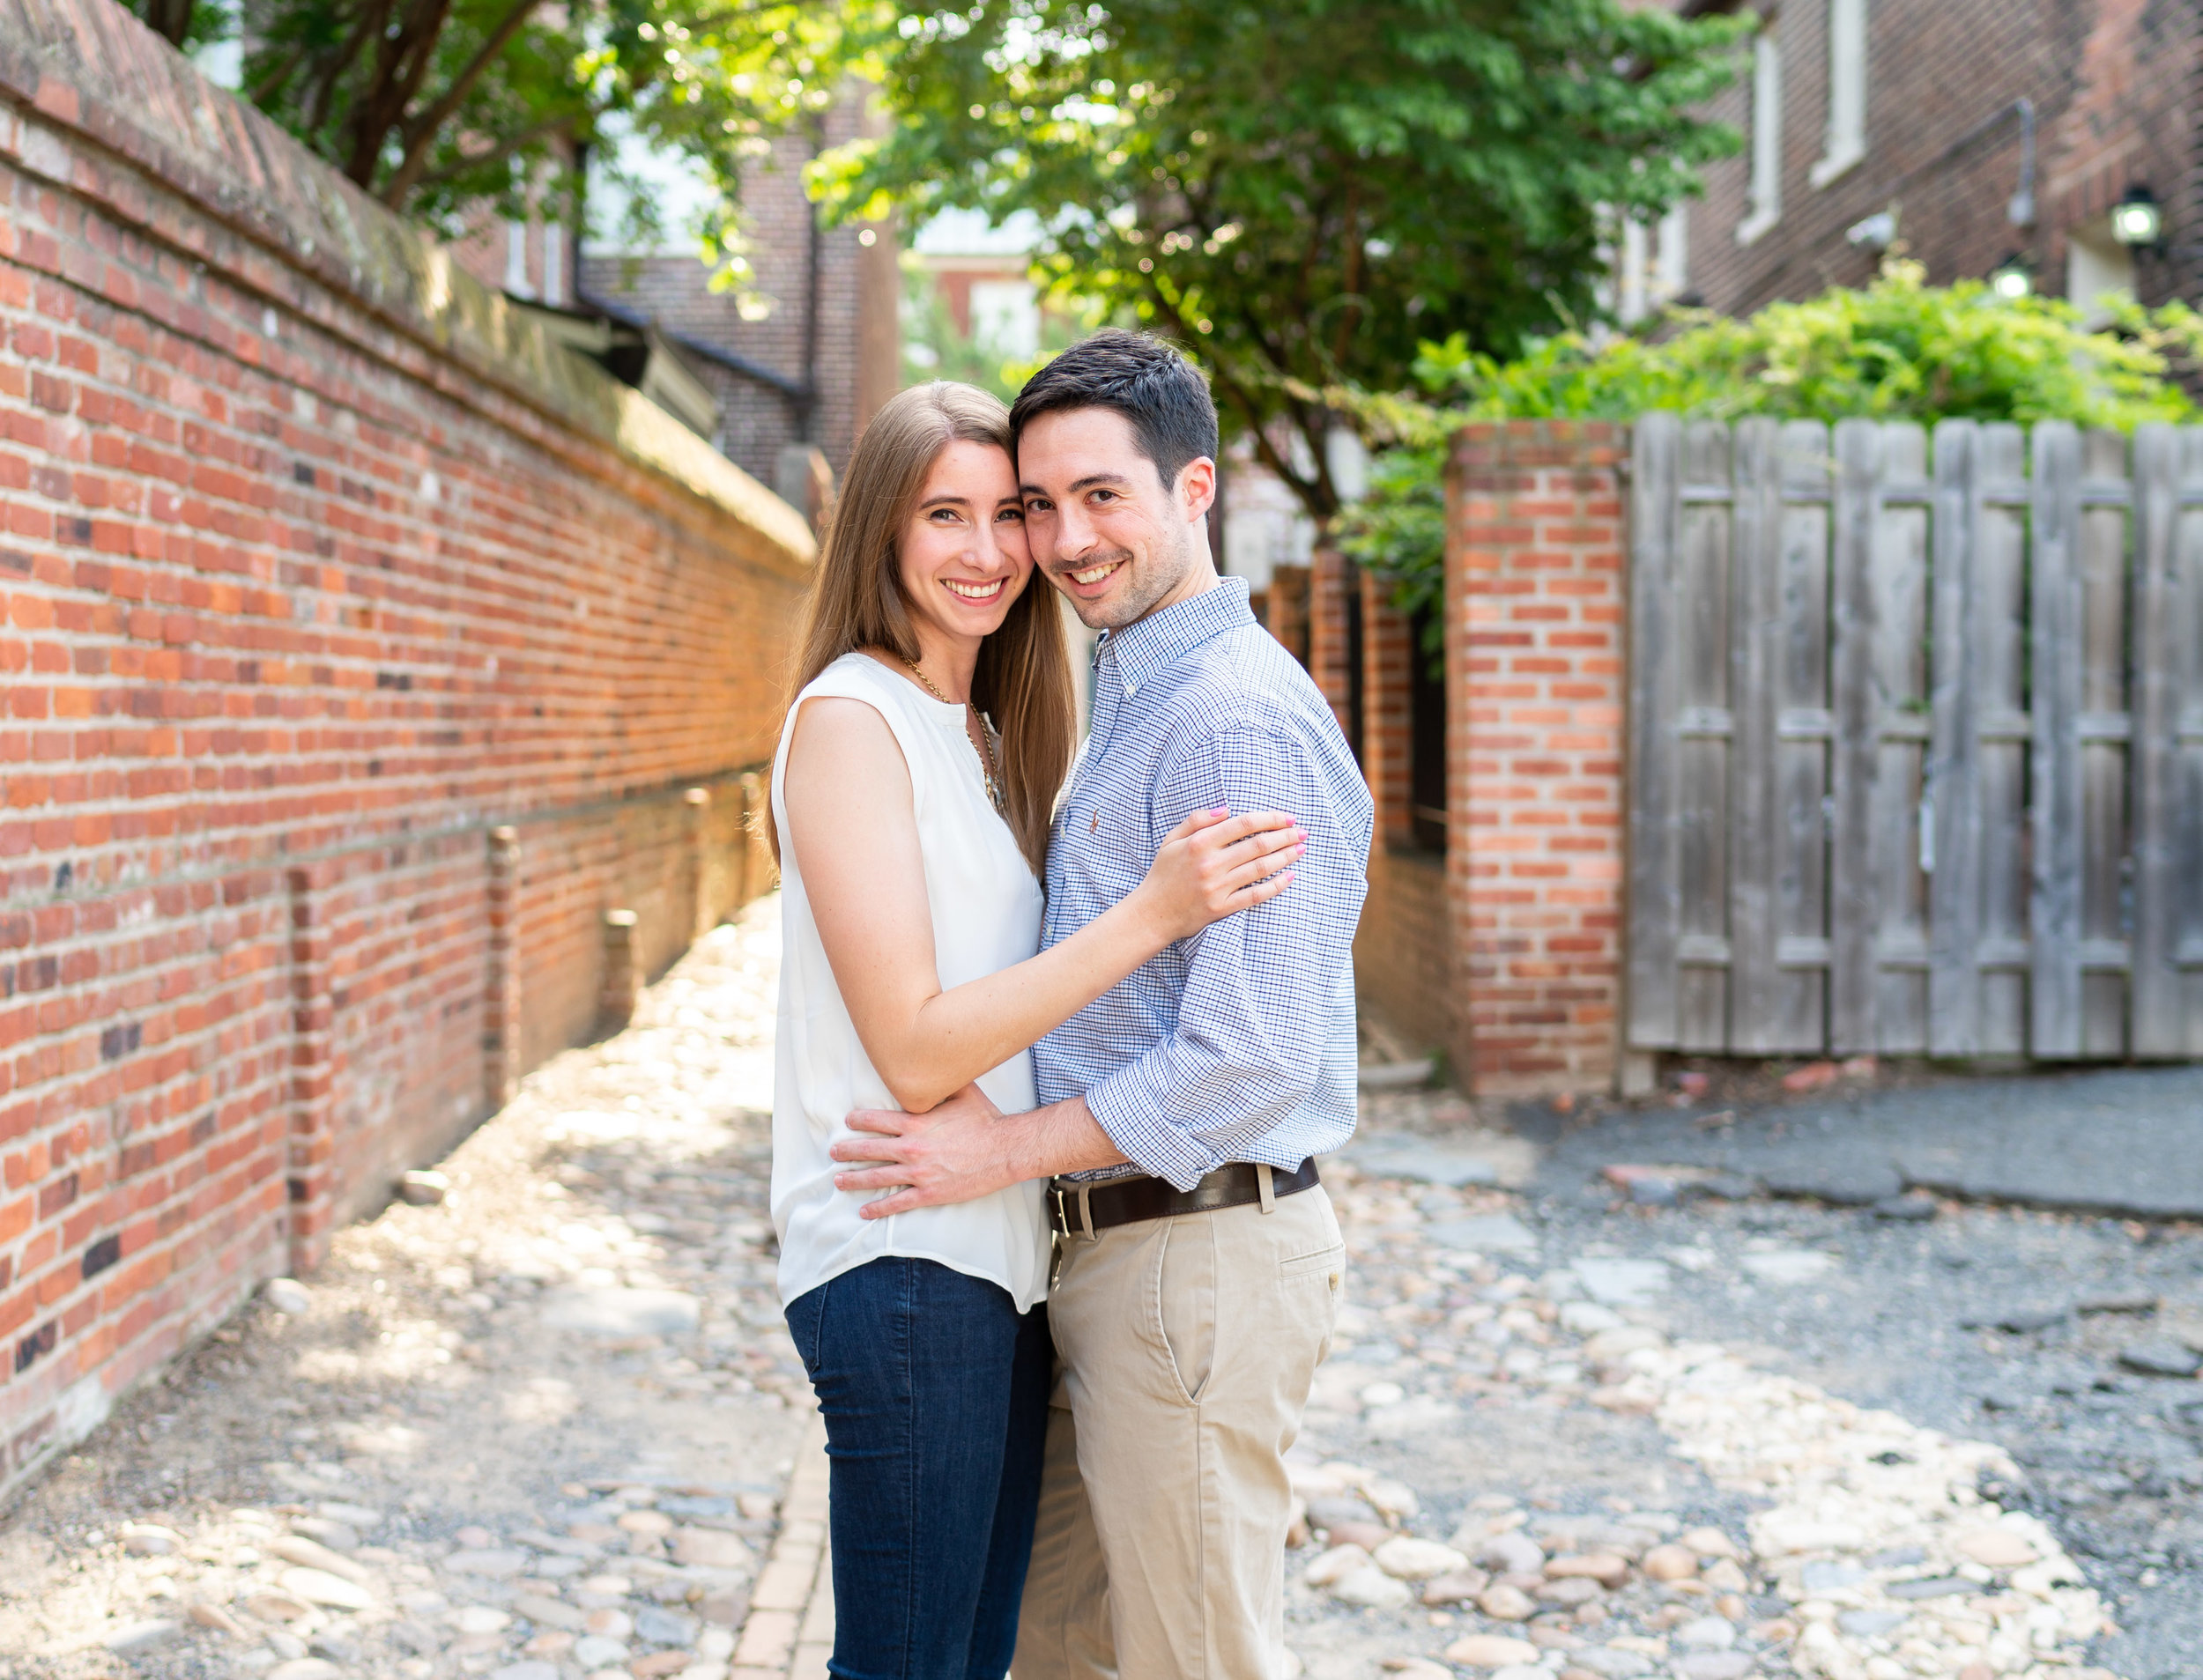 Wales Alley engagement session in Old Town Alexandria